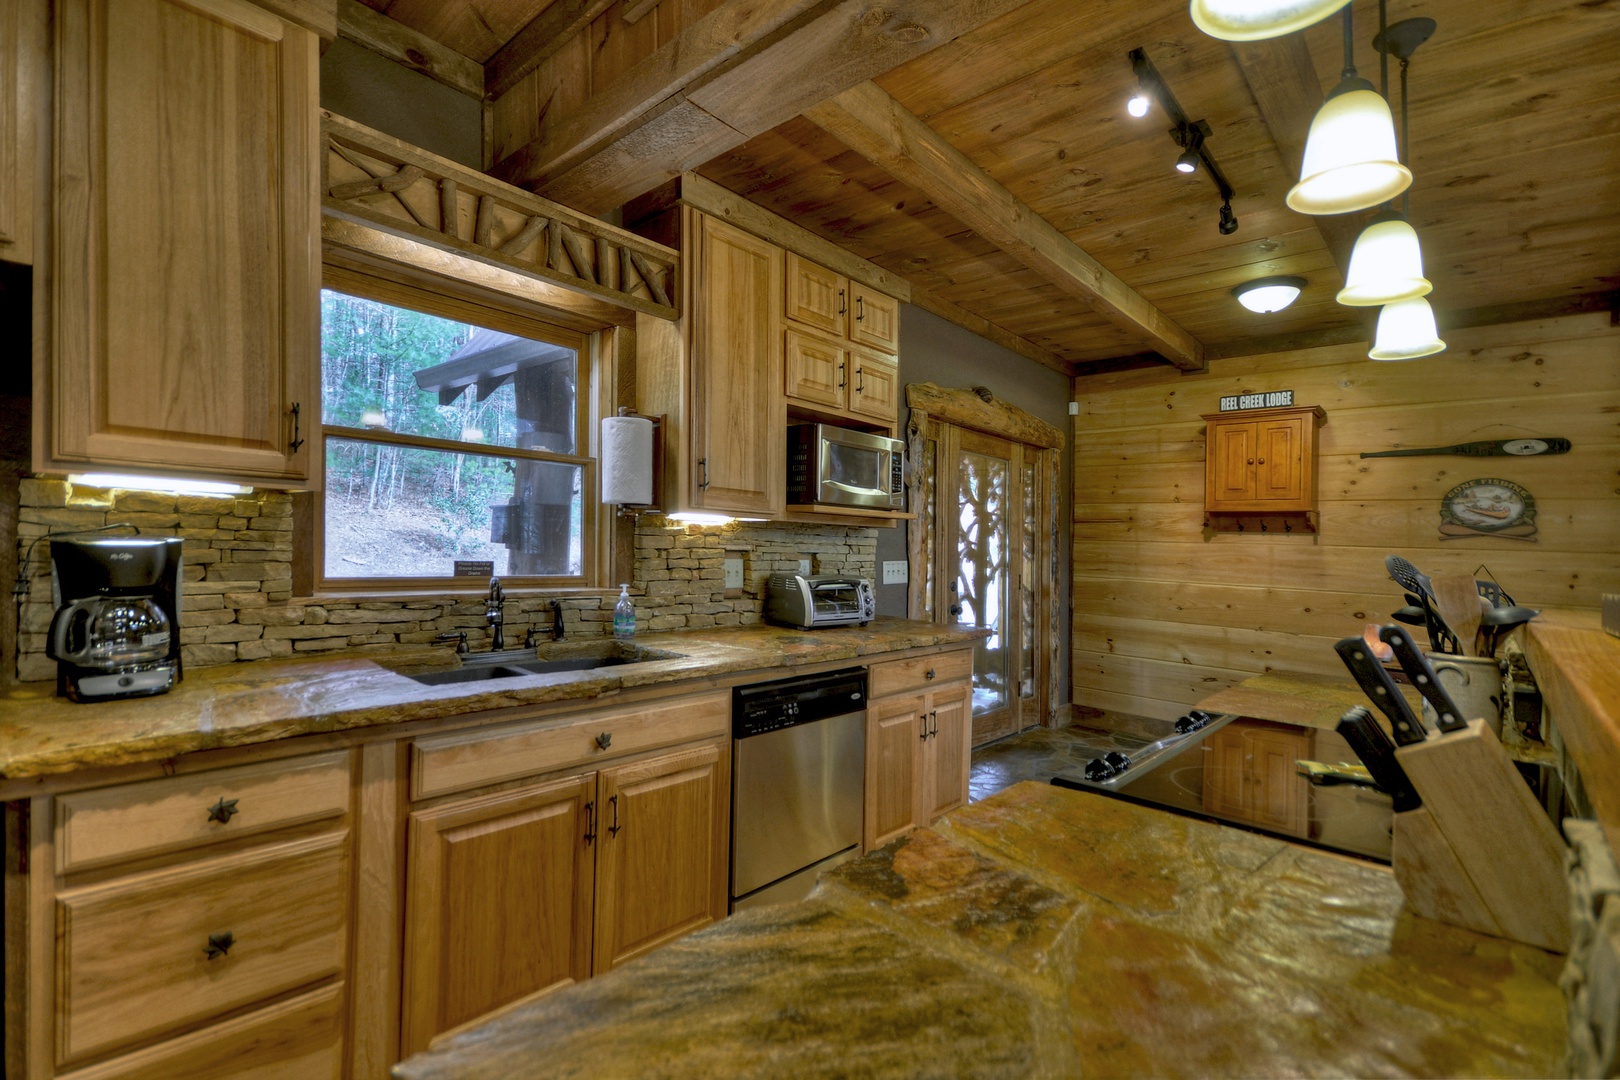 Reel Creek Lodge- Fully equipped kitchen area with stone countertops